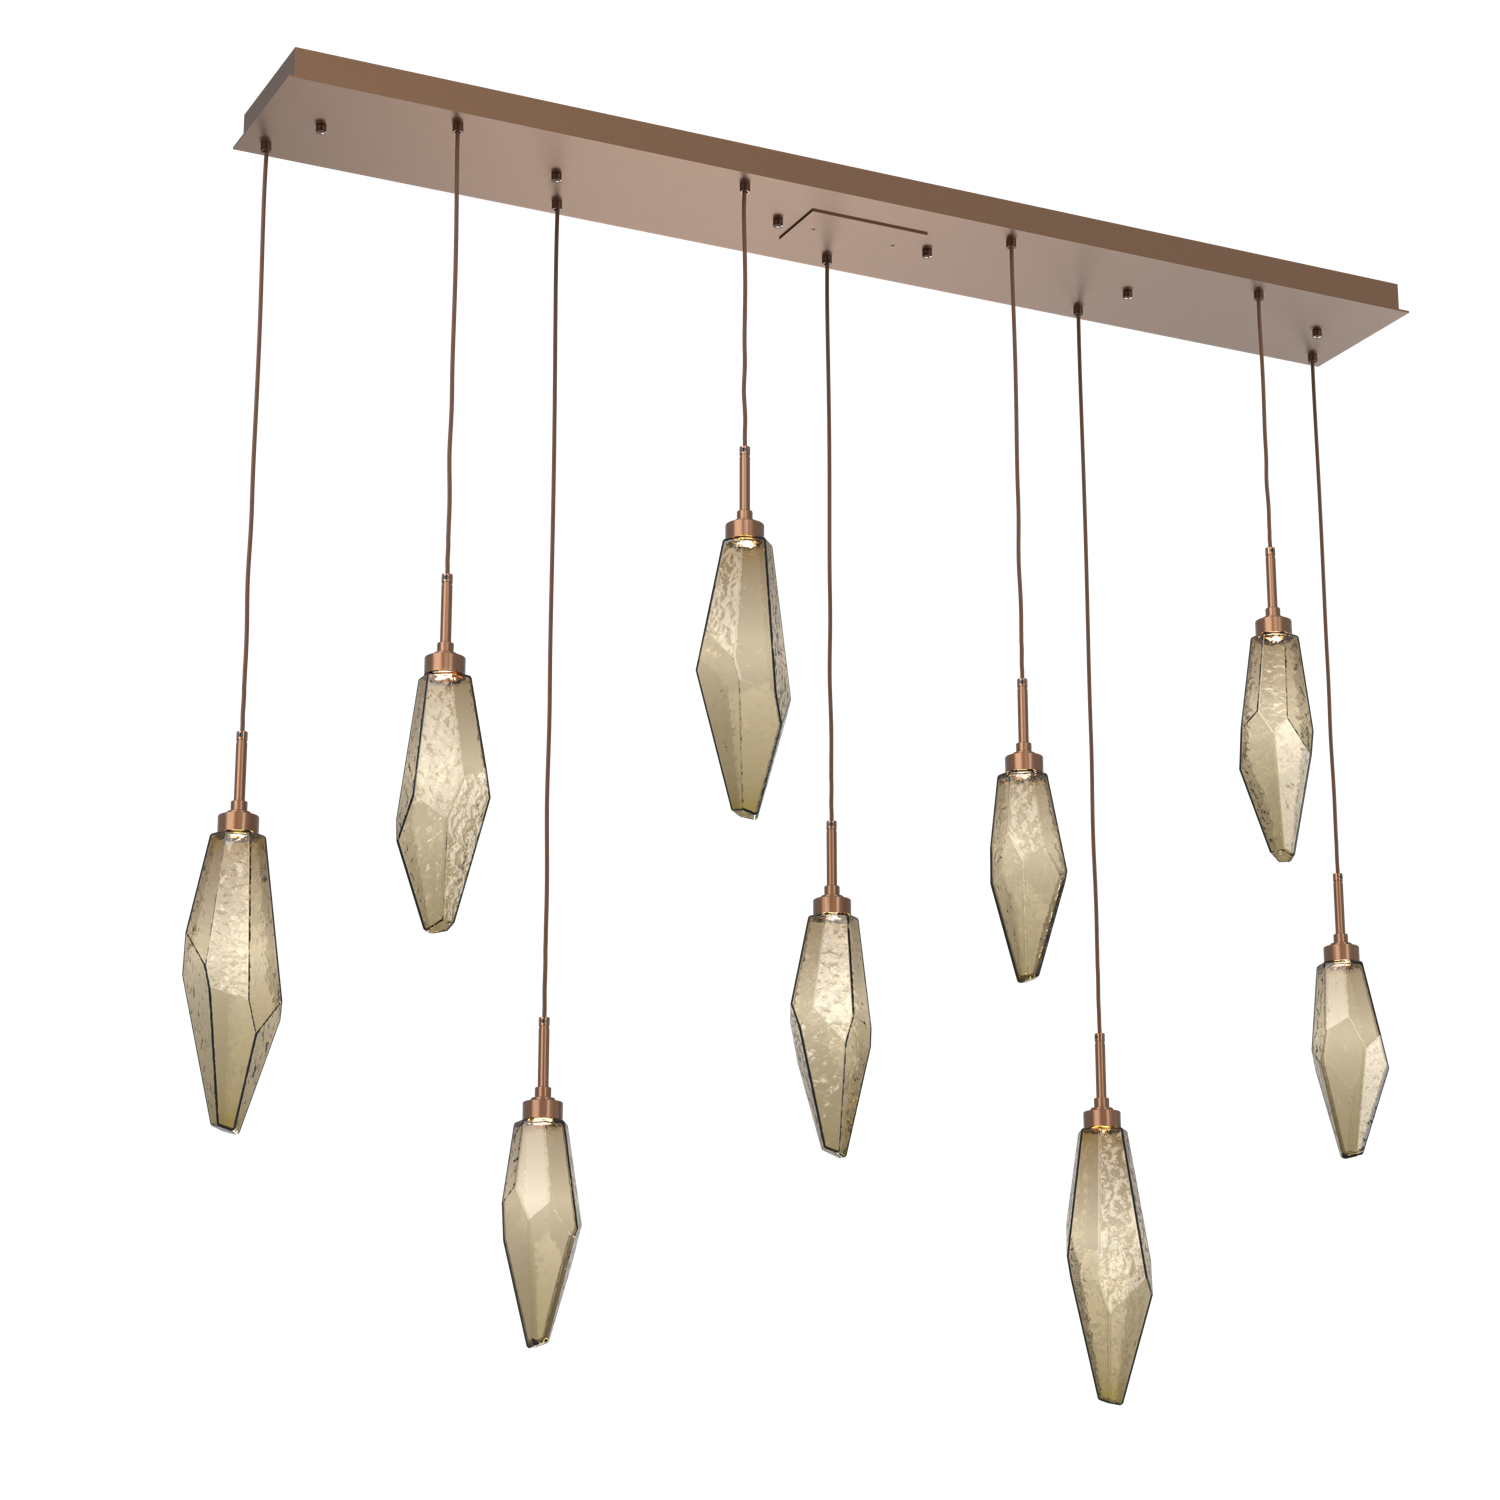 PLB0050-09-BB-CB-Hammerton-Studio-Rock-Crystal-9-light-linear-pendant-chandelier-with-burnished-bronze-finish-and-chilled-bronze-blown-glass-shades-and-LED-lamping